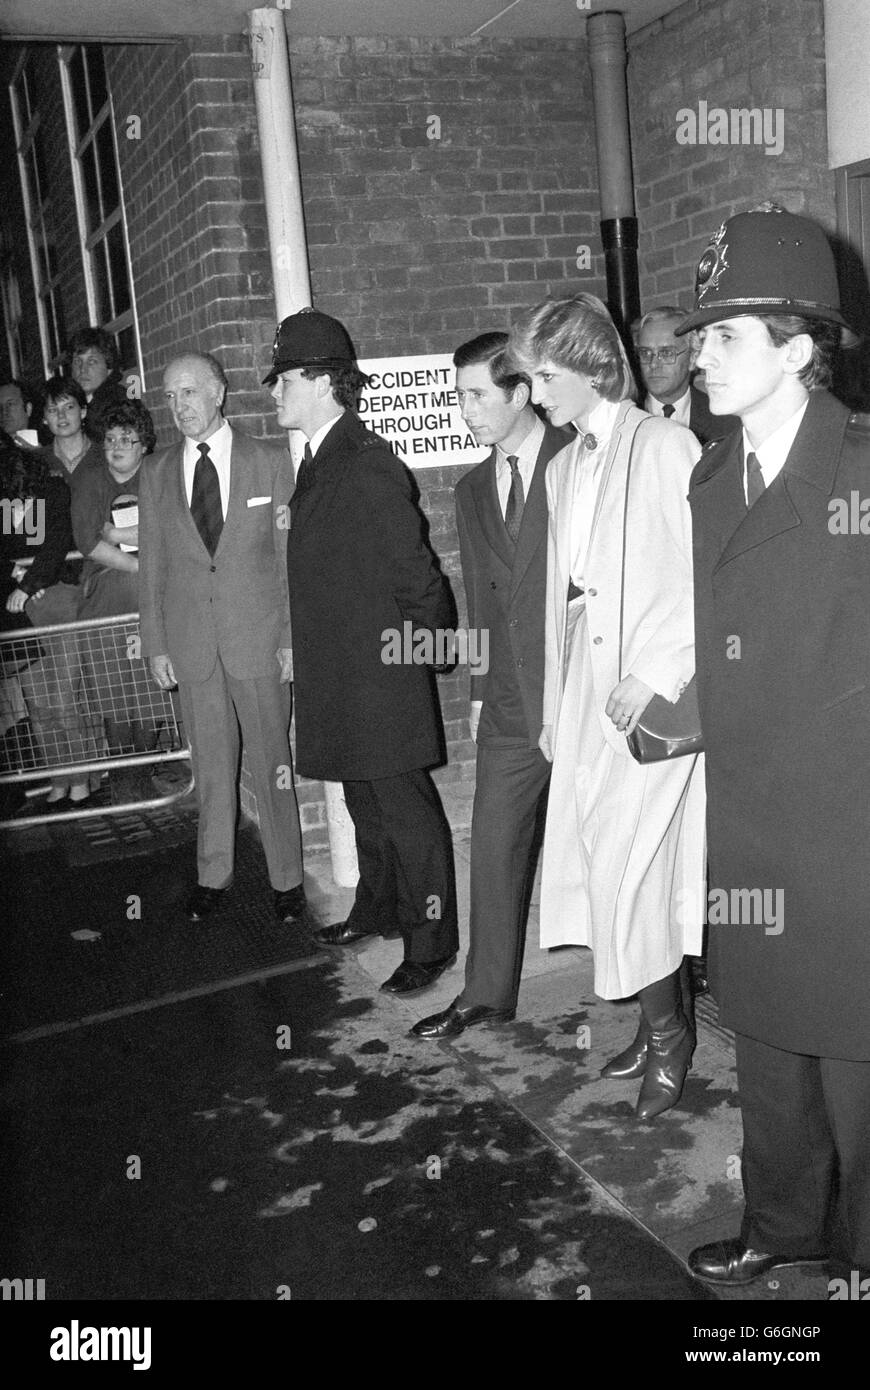 Prince Charles and Princess Diana leave Westminster Hospital in London after they visited patients injured in the Harrods car bomb attack. Stock Photo